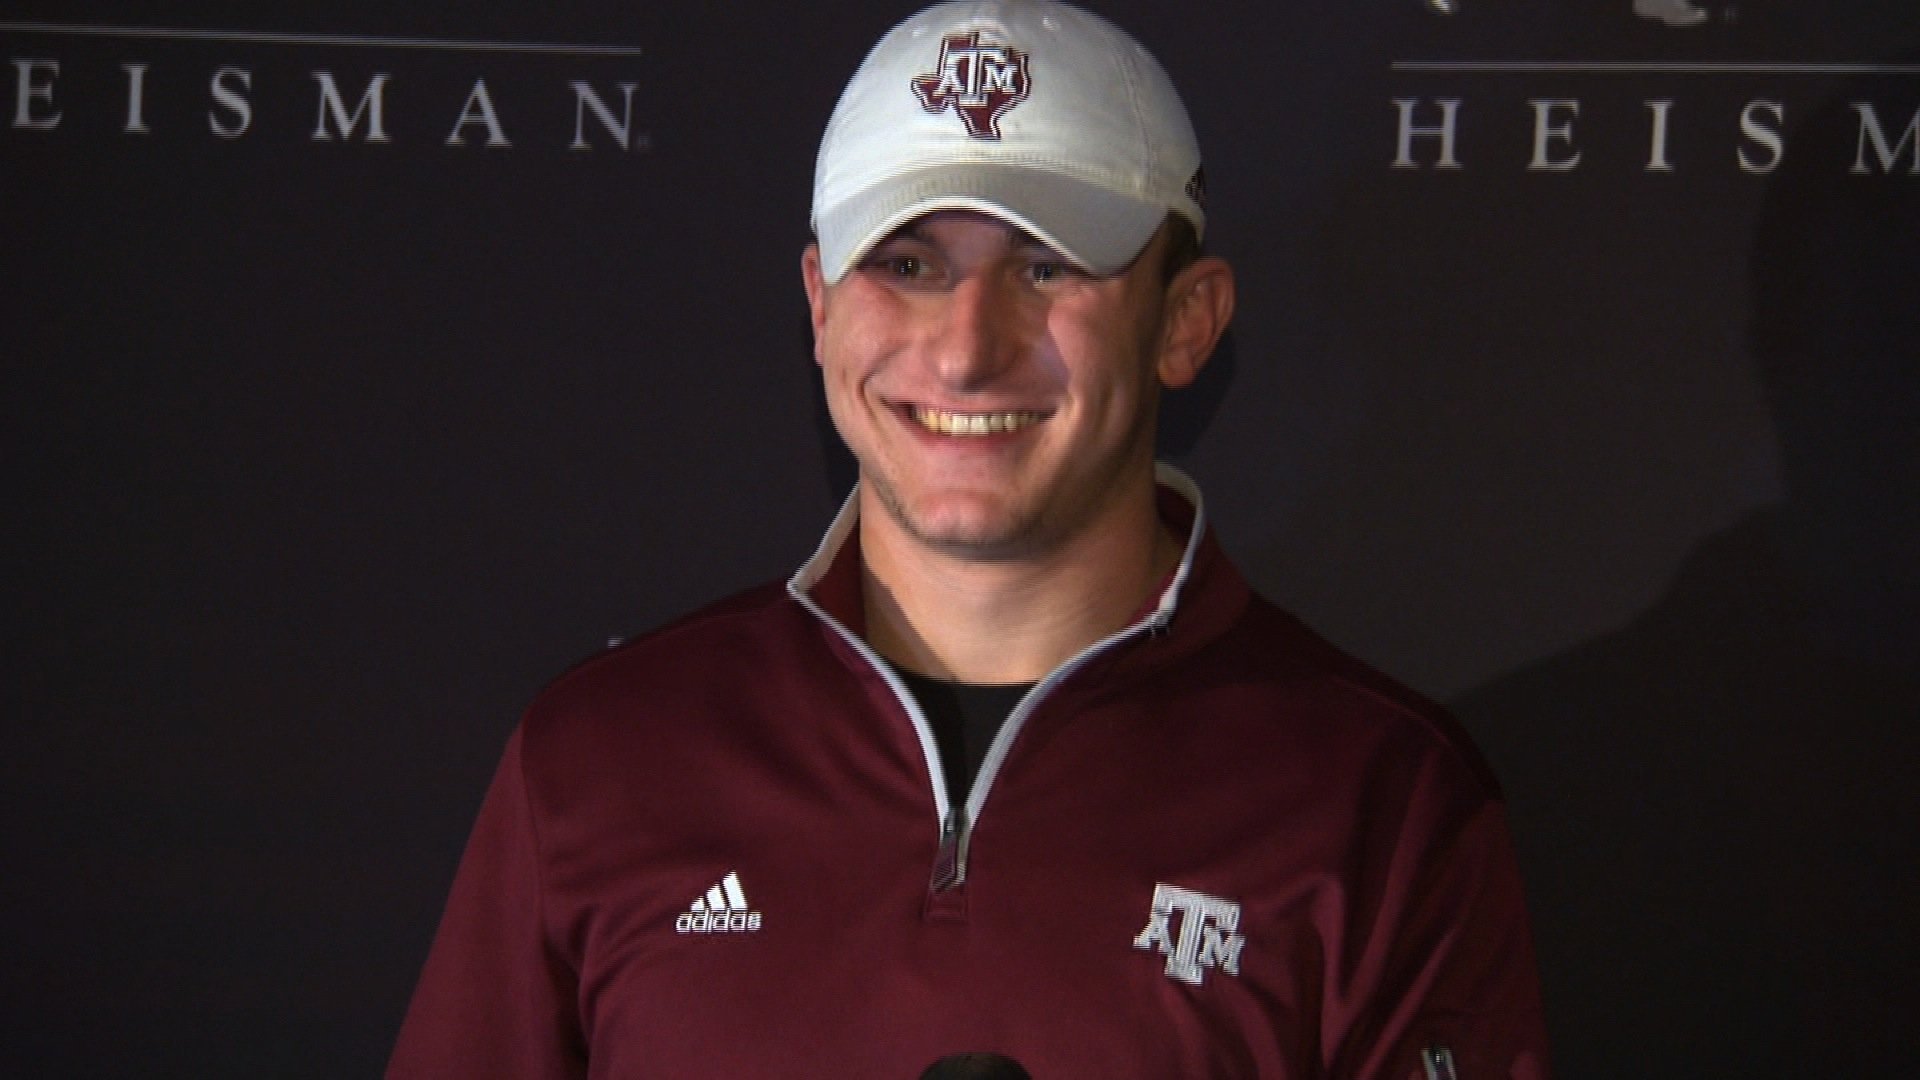 Dallas police said Thursday they have referred NFL quarterback Johnny Manziel's case to the district attorney as a misdemeanor assault/domestic violence allegation.

File- Johnny Manziel at the 2013 Heisman trophy media avail in New York.